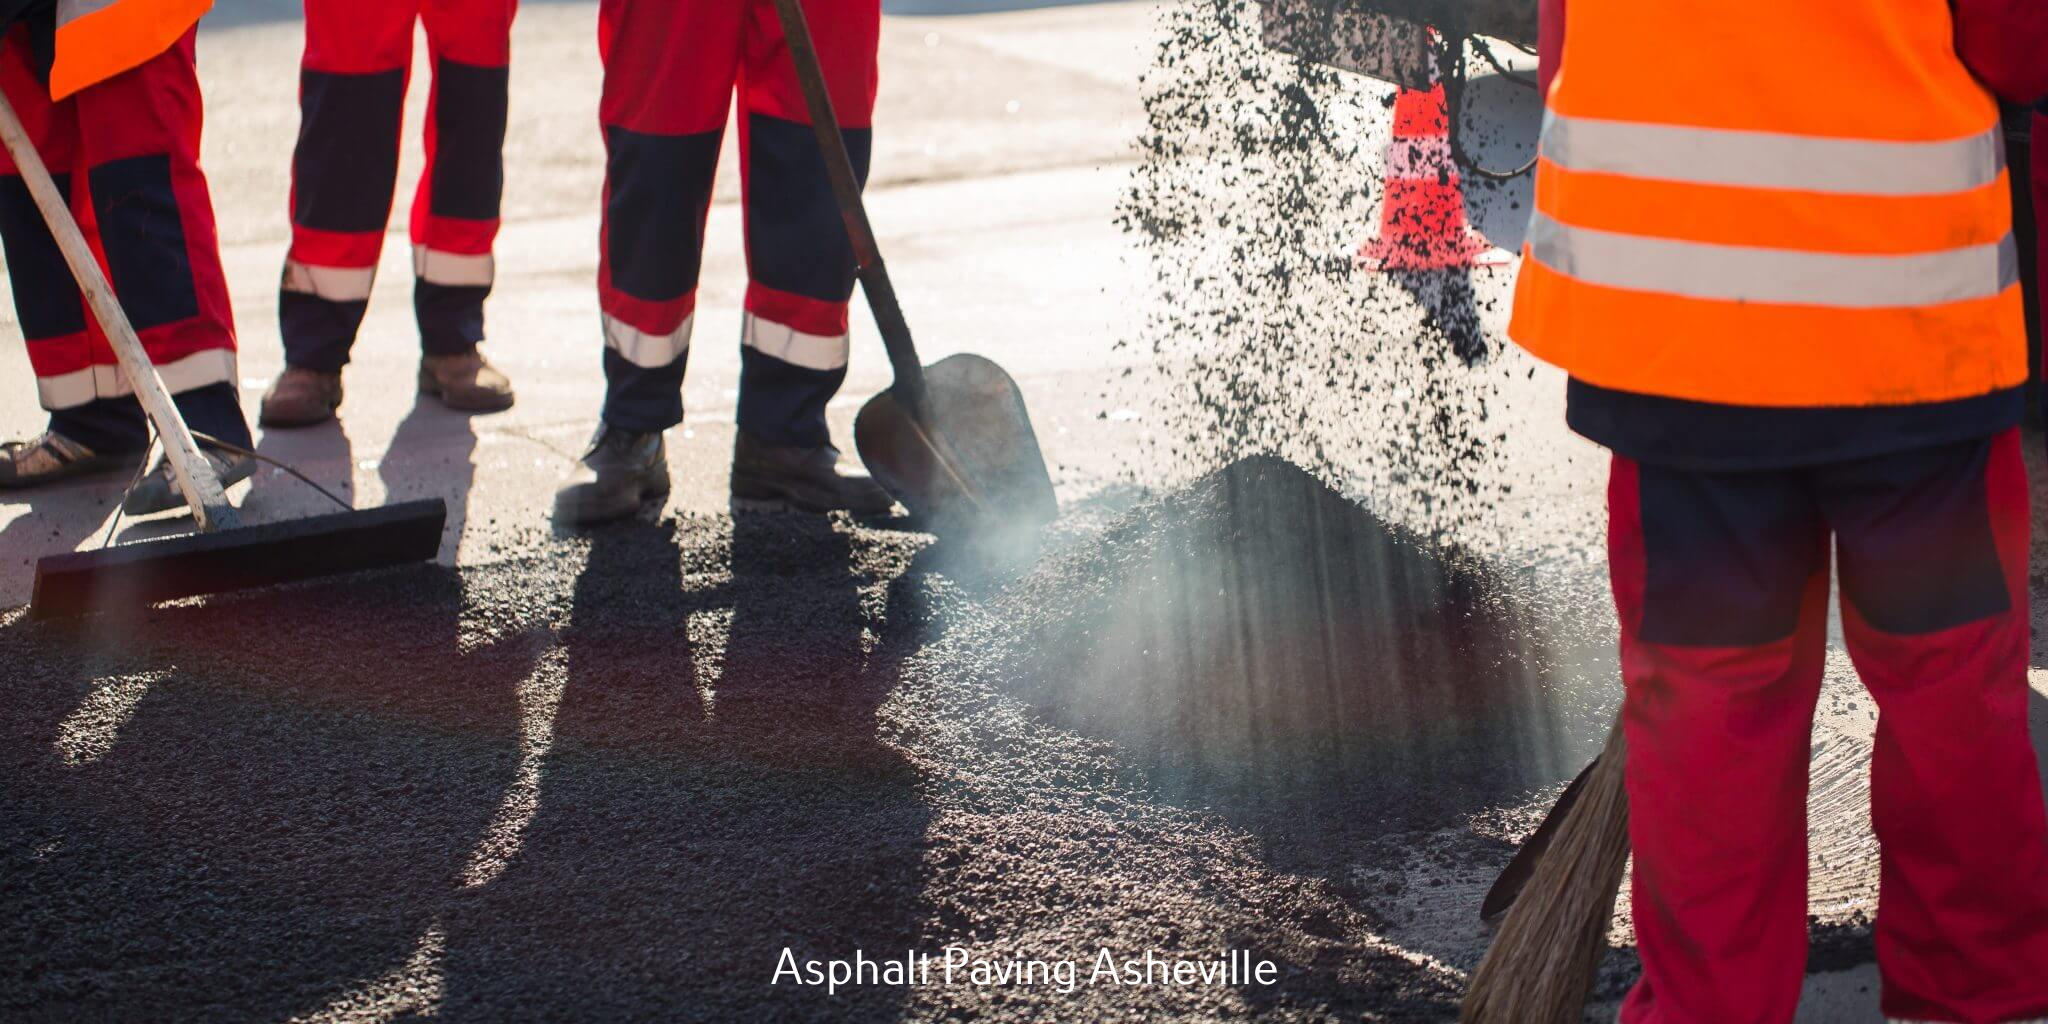 Asheville Asphalt Paving Pros Explains the Environmental Benefits of Recycled Asphalt in Paving Projects